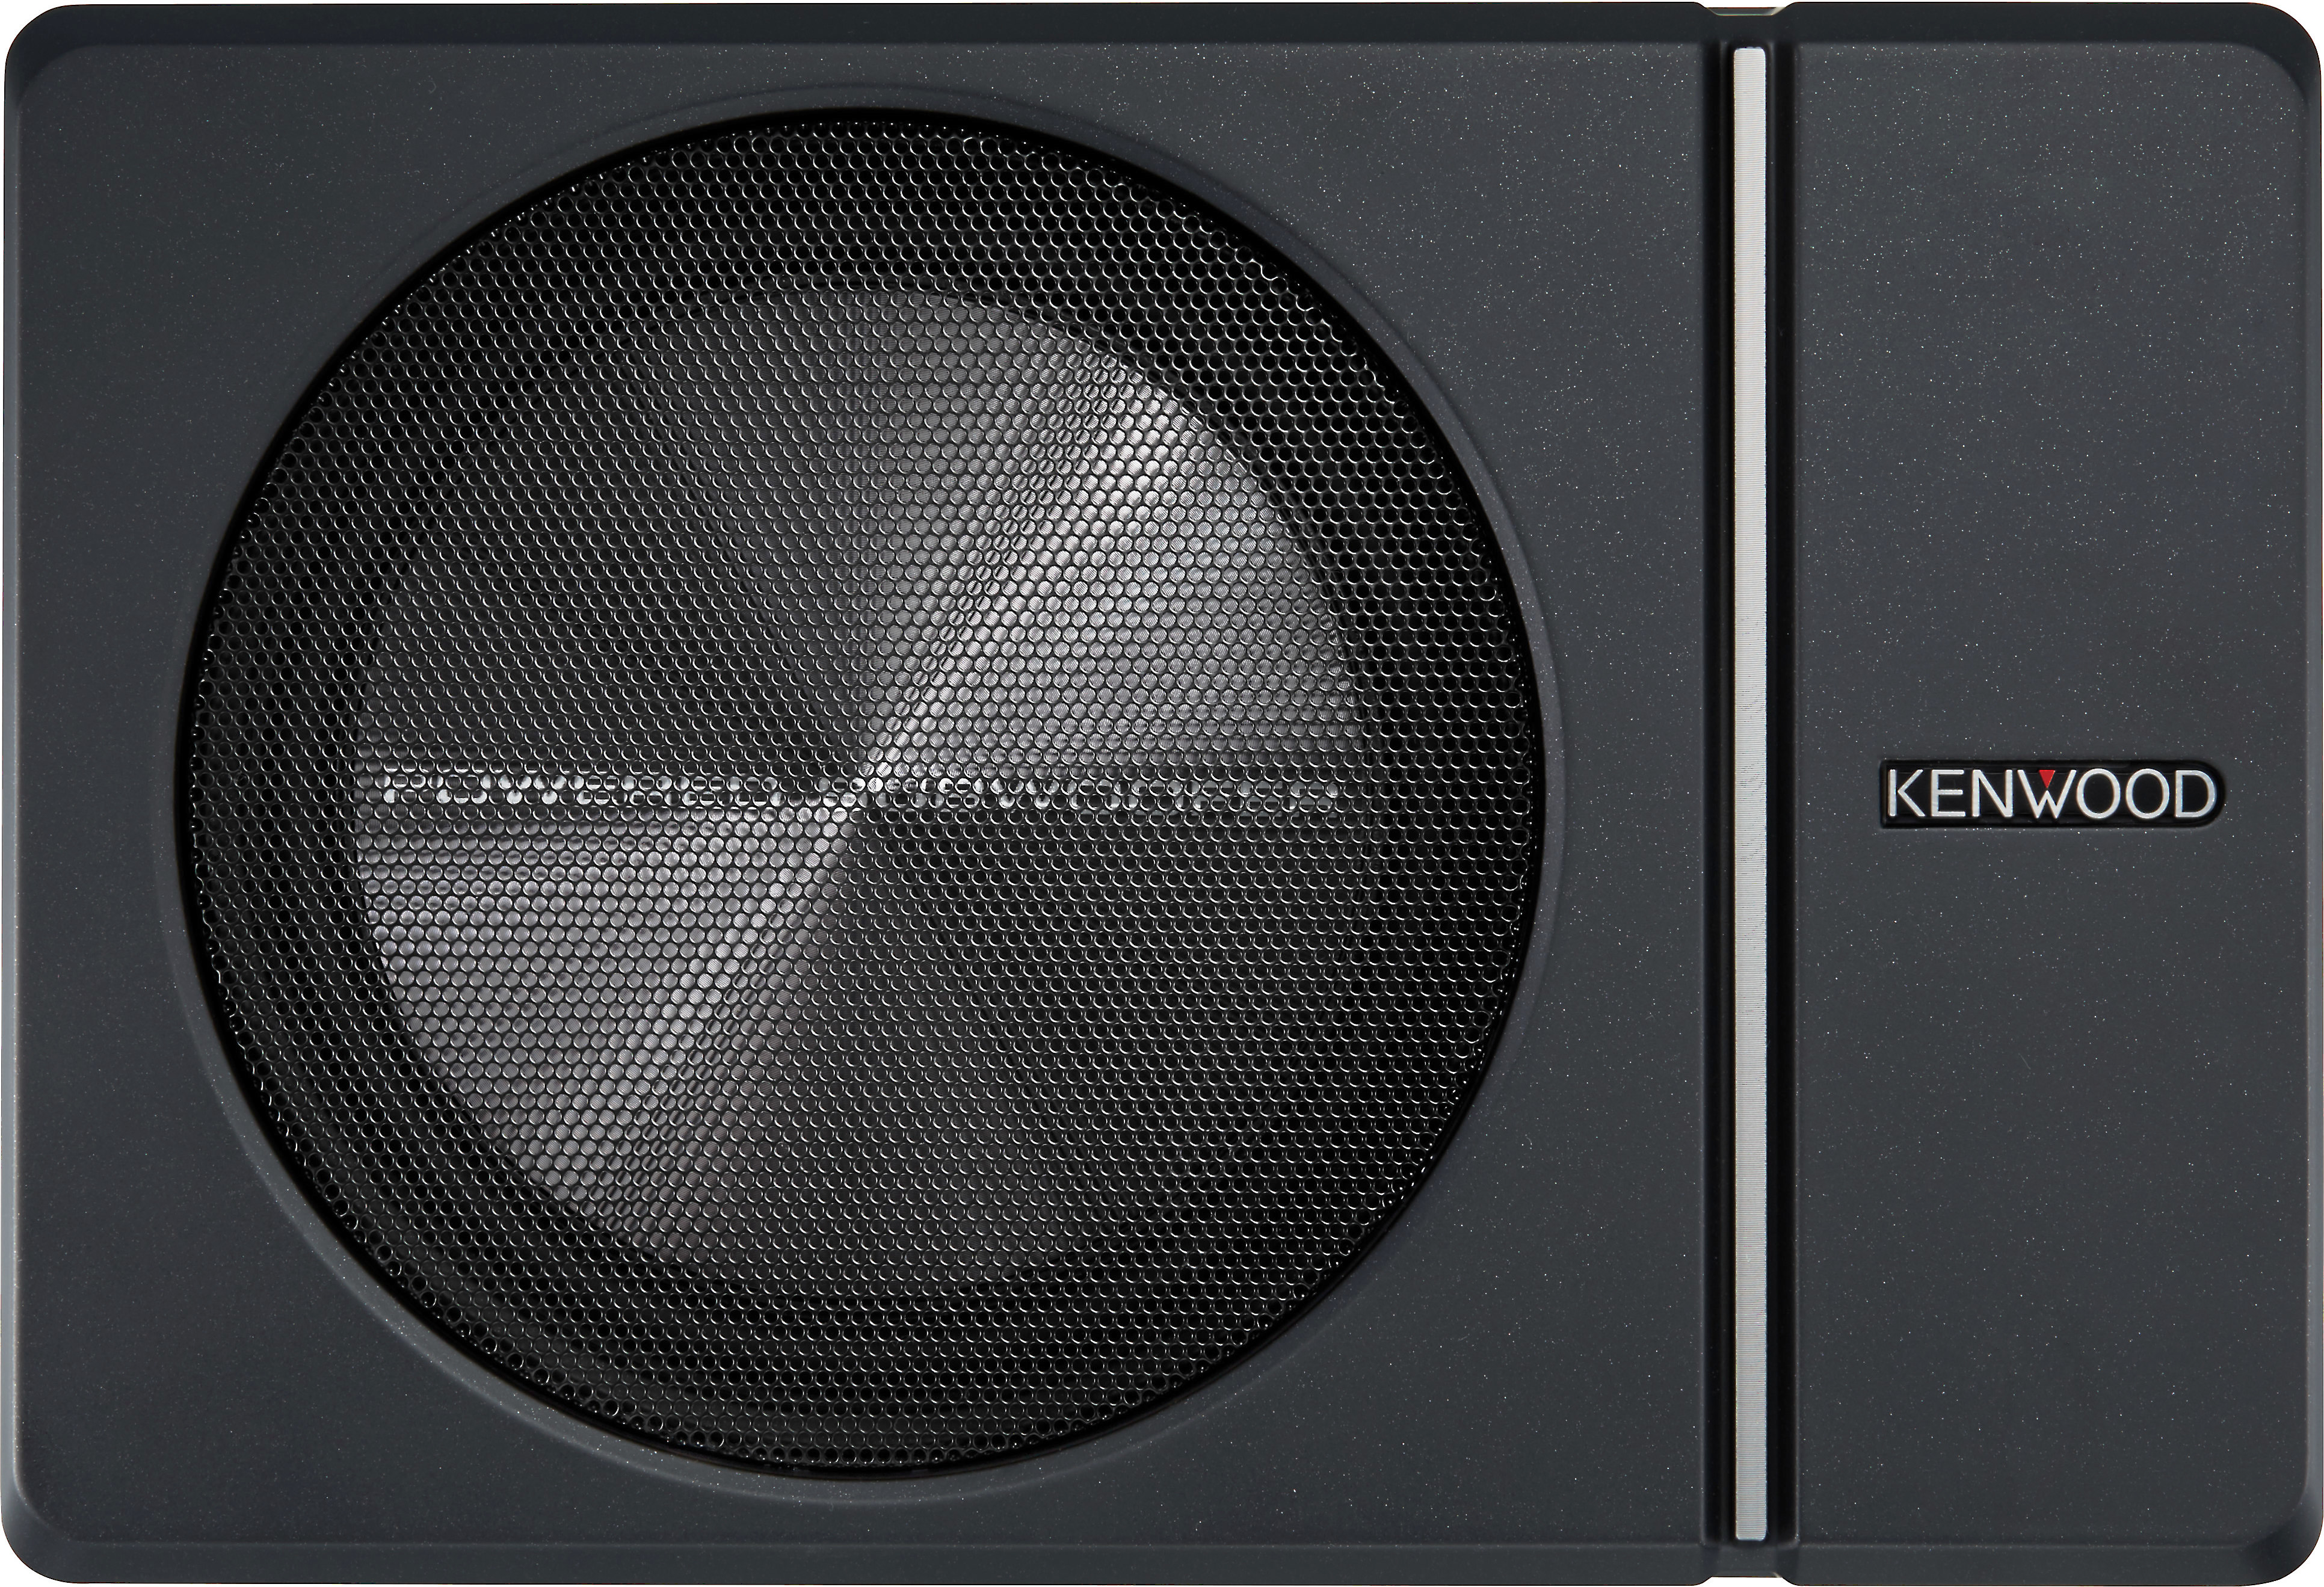 Customer Reviews: Kenwood Compact powered 8" subwoofer at Crutchfield